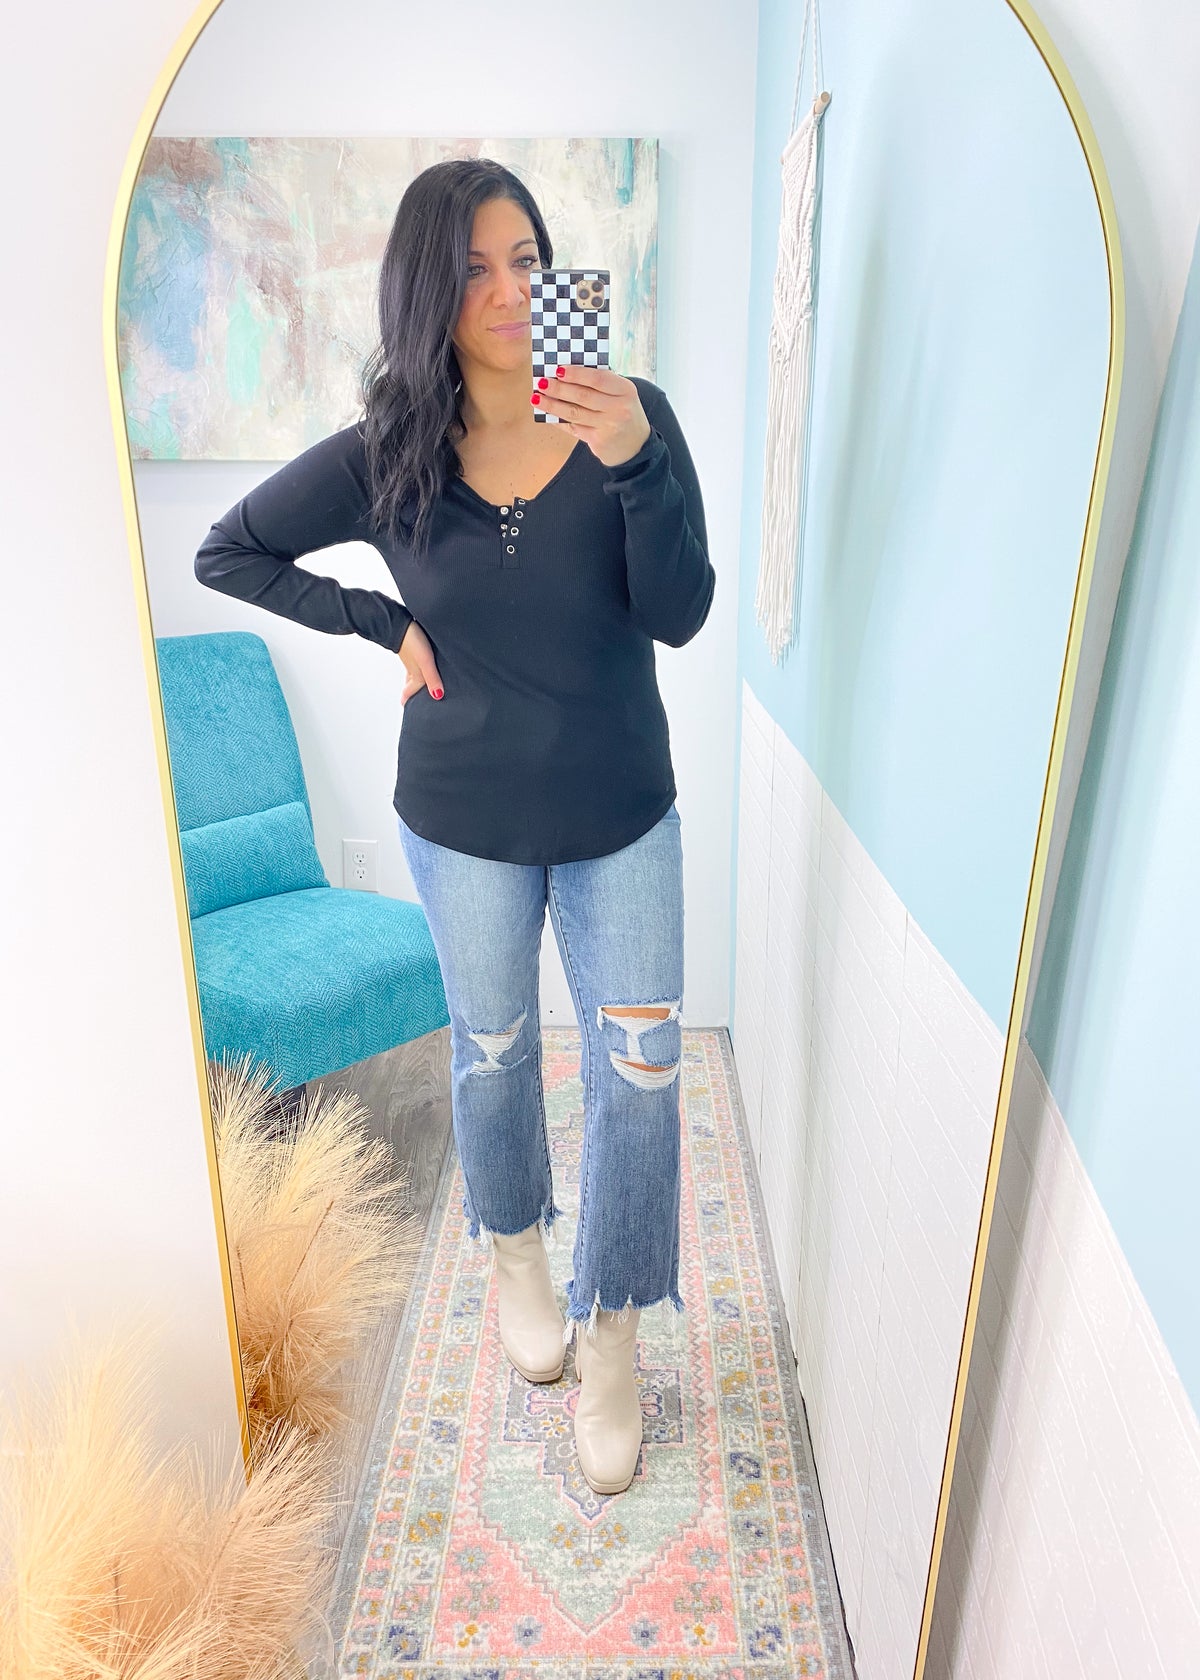 'Hailey' Black Snap Button Ribbed Henley with Thumbholes-Every wardrobe should have a classic henley! Wear alone or as a layering piece. A year round top.
-Cali Moon Boutique, Plainville Connecticut